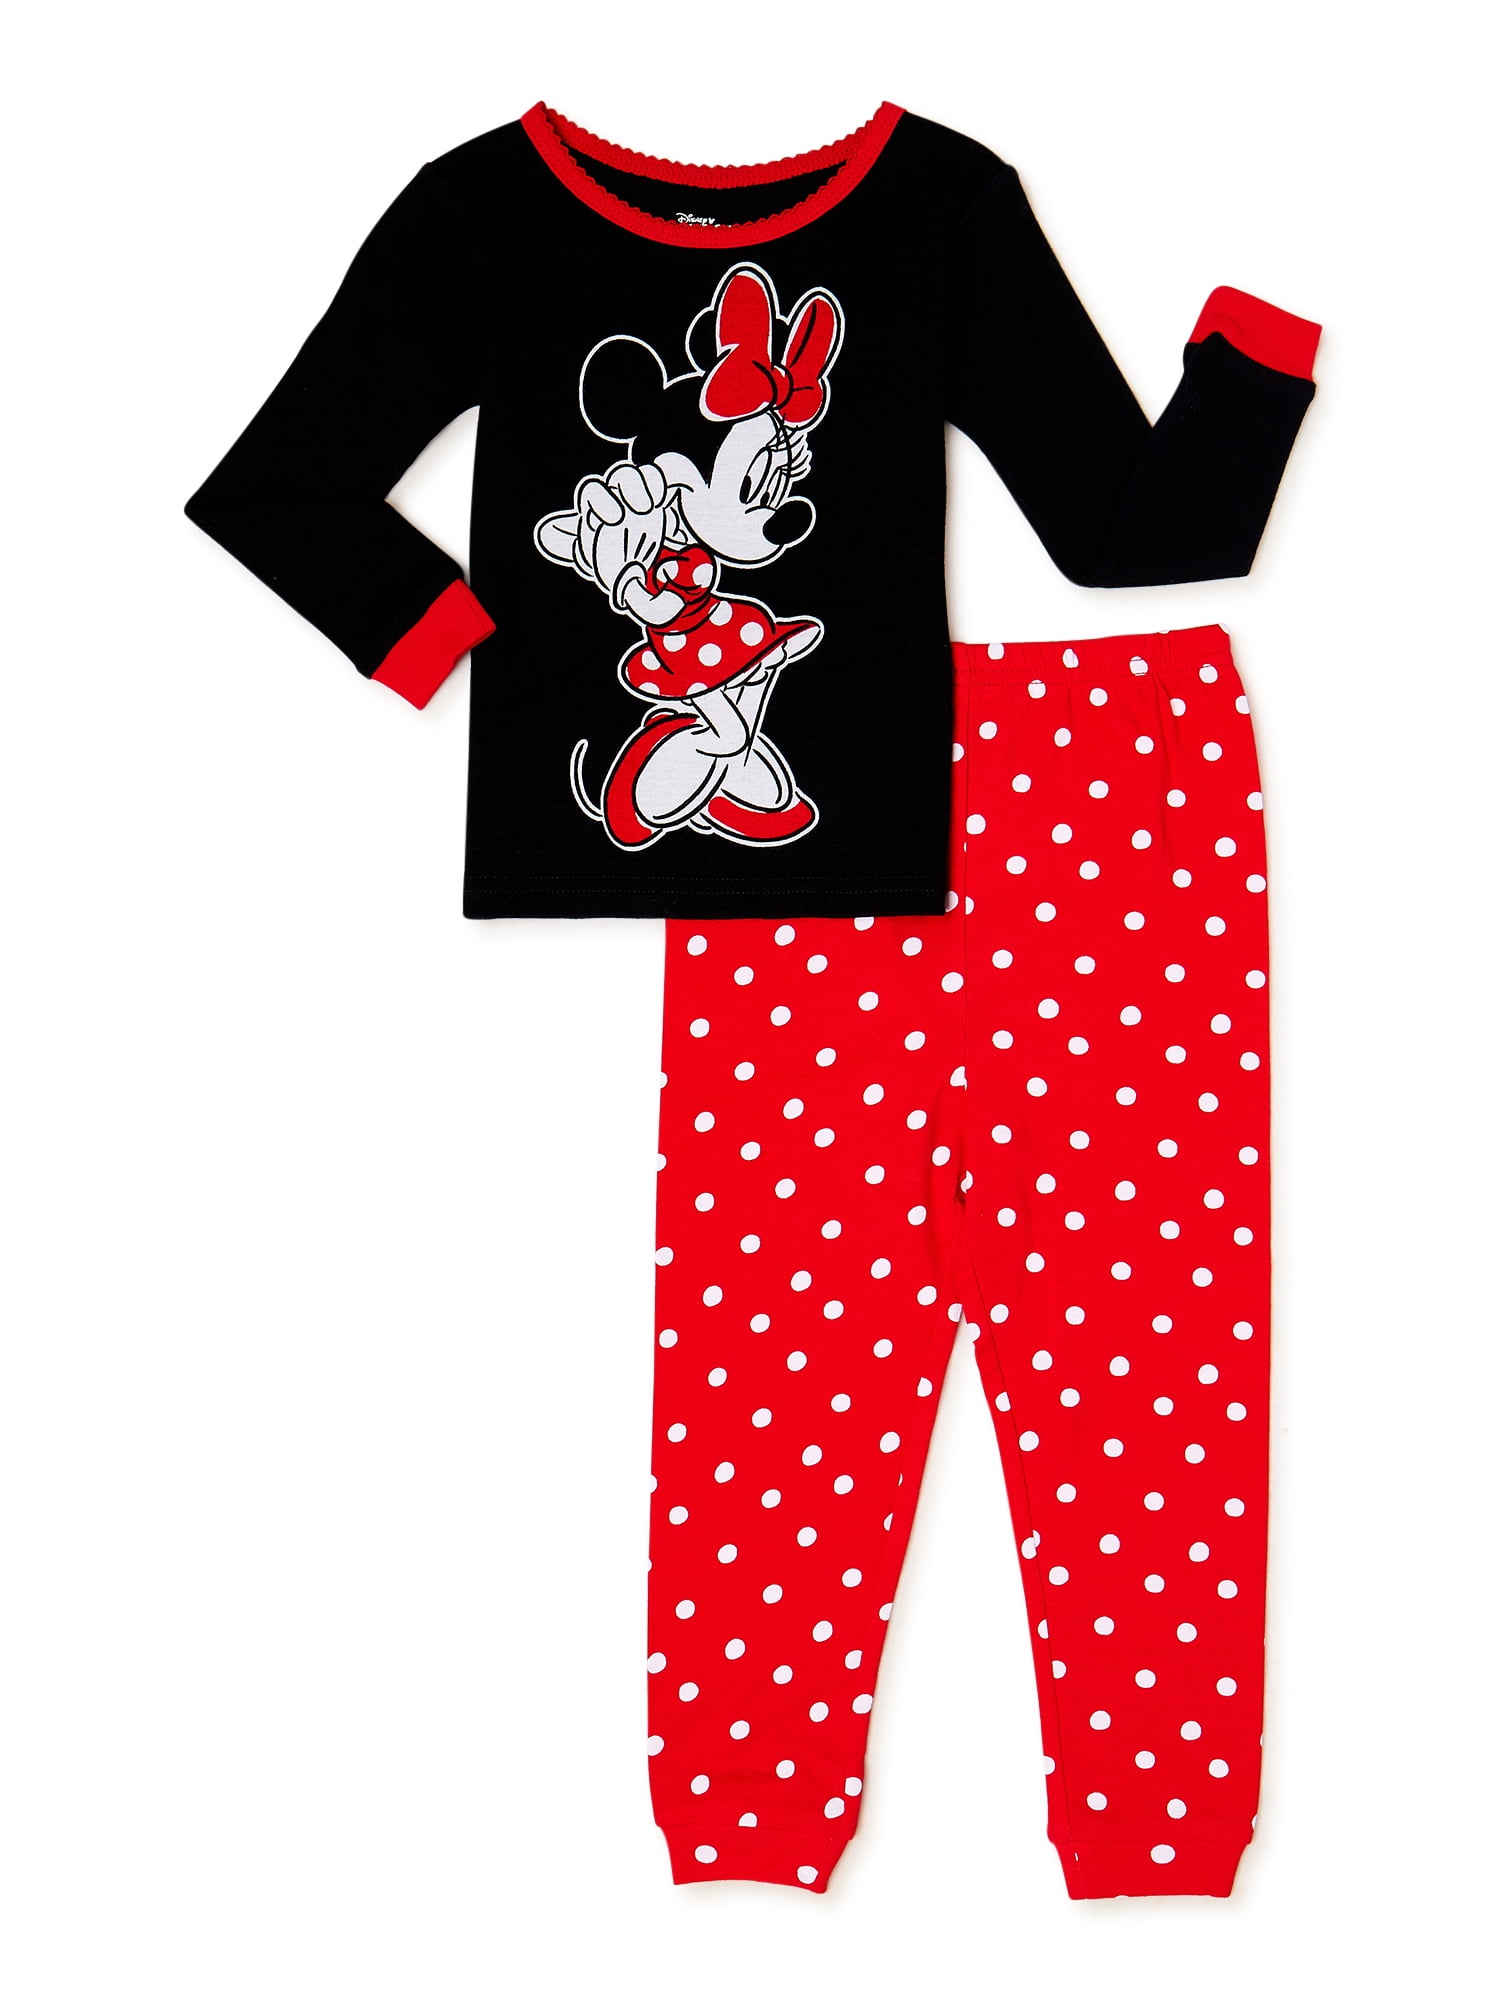 Disney Minnie Mouse Toddler Girls Long Sleeve Top and Pants, 2-Piece Pajamas Set, Sizes 2 T-5 T